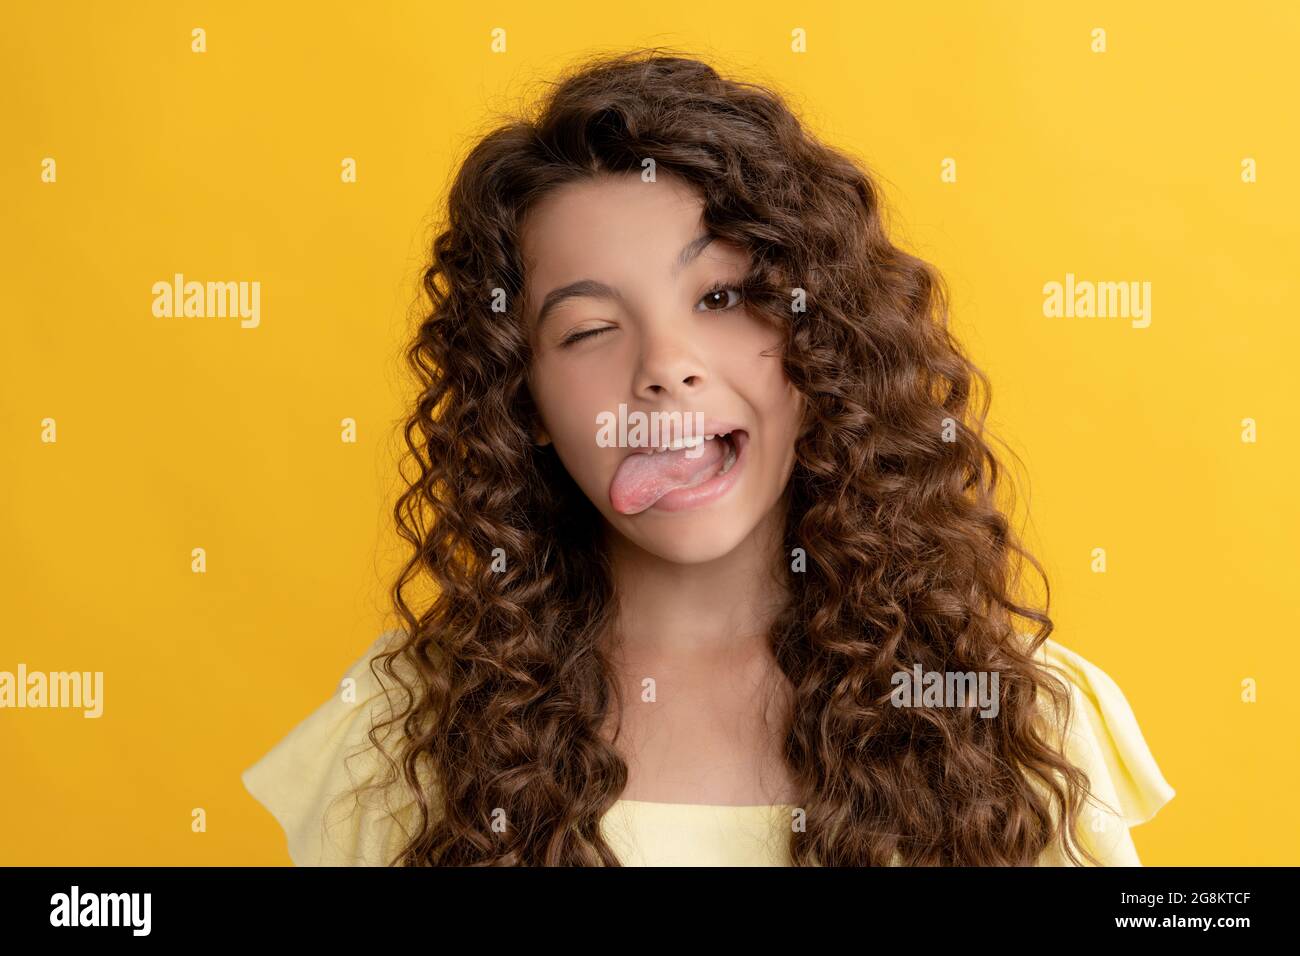 funny child with long curly hair and perfect skin showing tongue, fashion Stock Photo